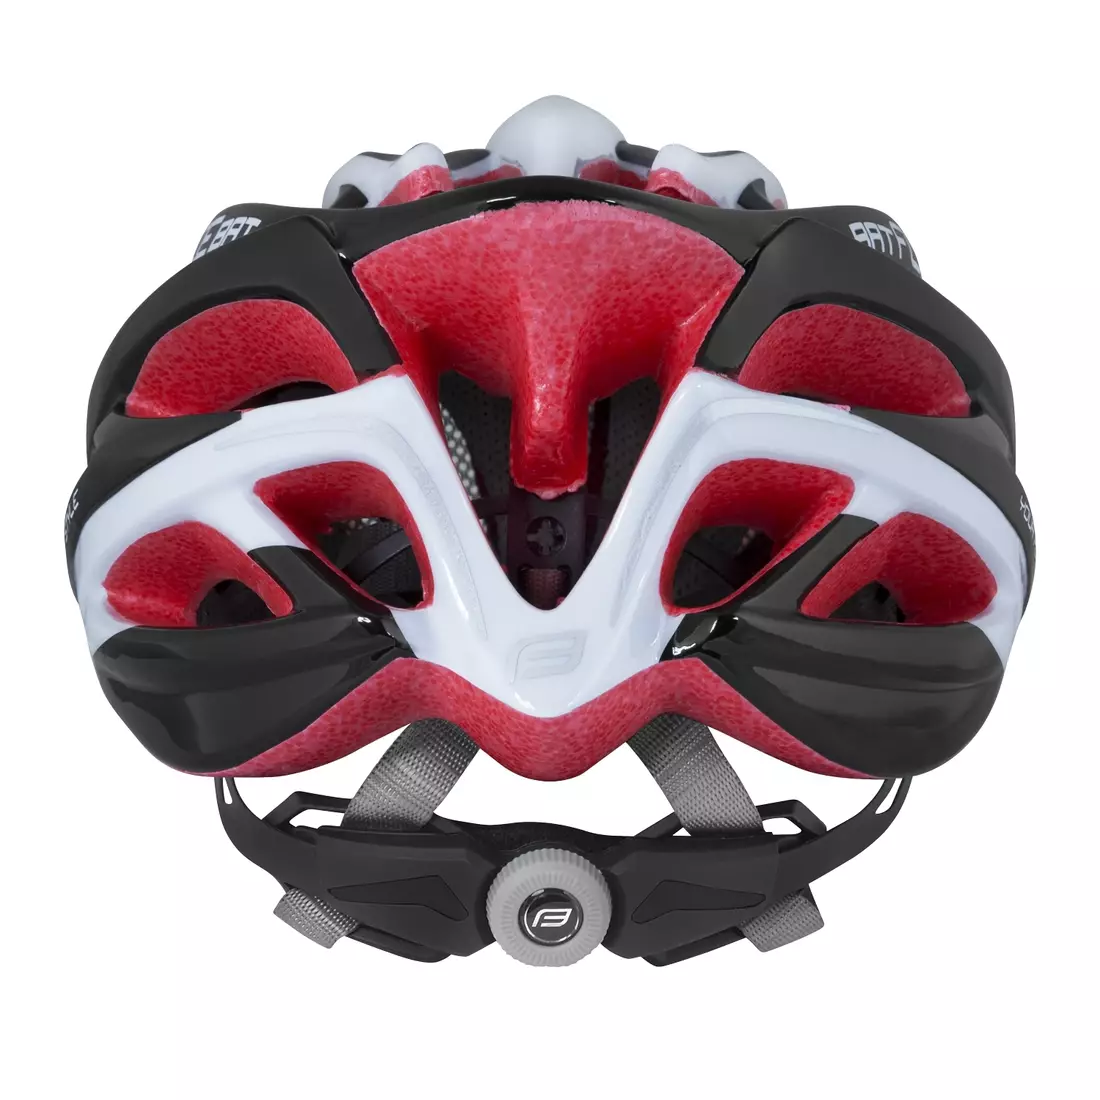 FORCE BAT bicycle helmet, black, white and red